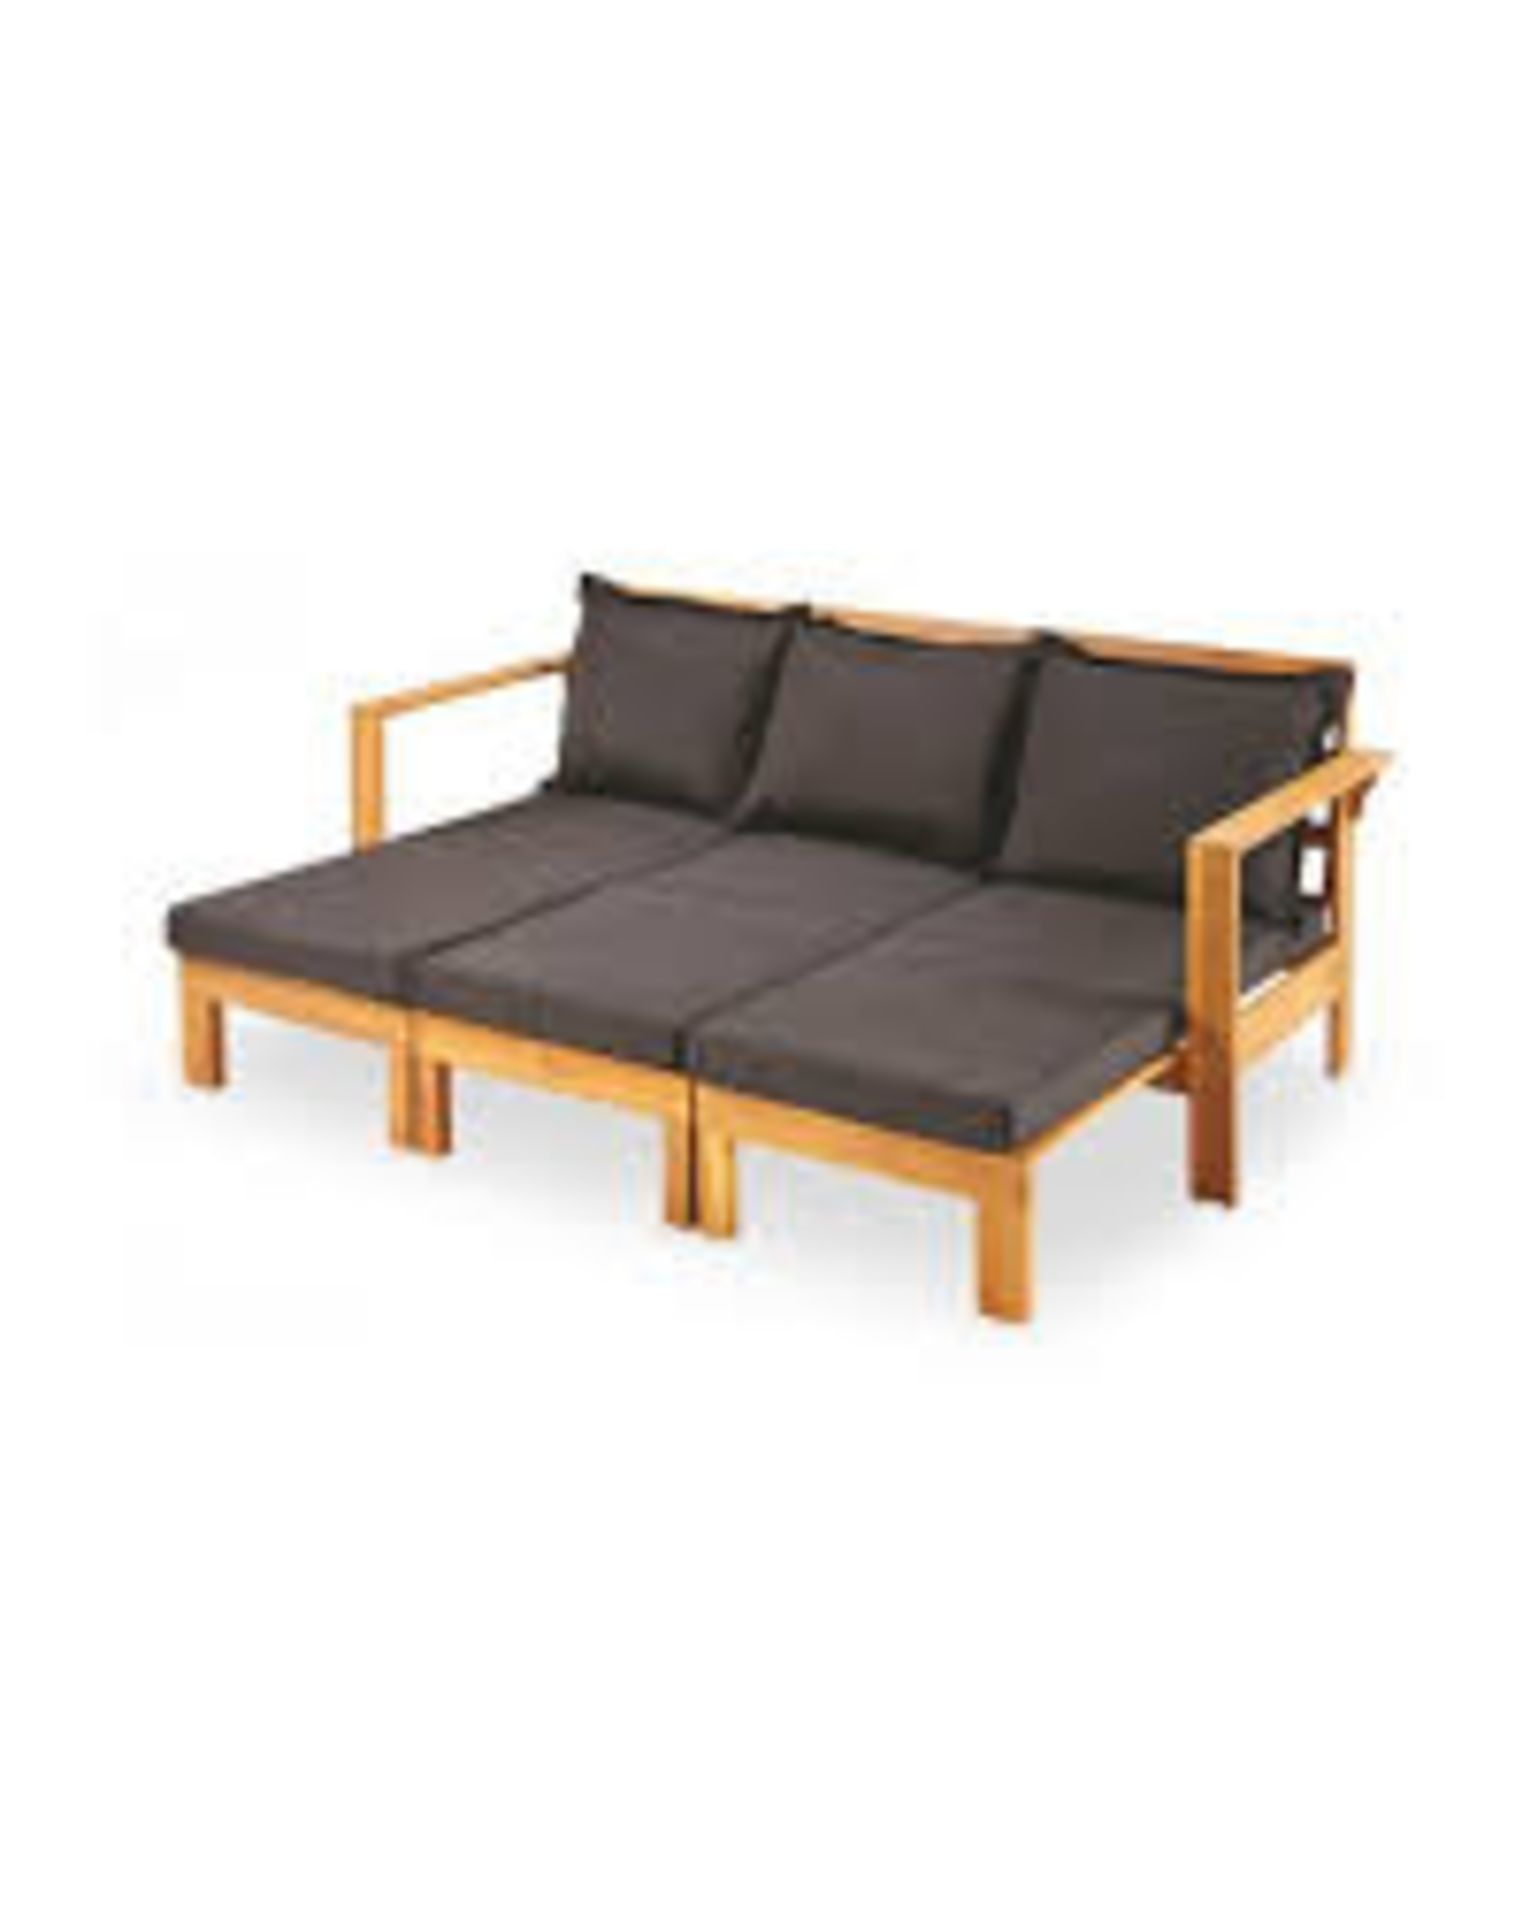 Luxury Wooden Garden Day Bed. Create a place of outdoor comfort with this stylish Luxury Wooden - Image 2 of 2